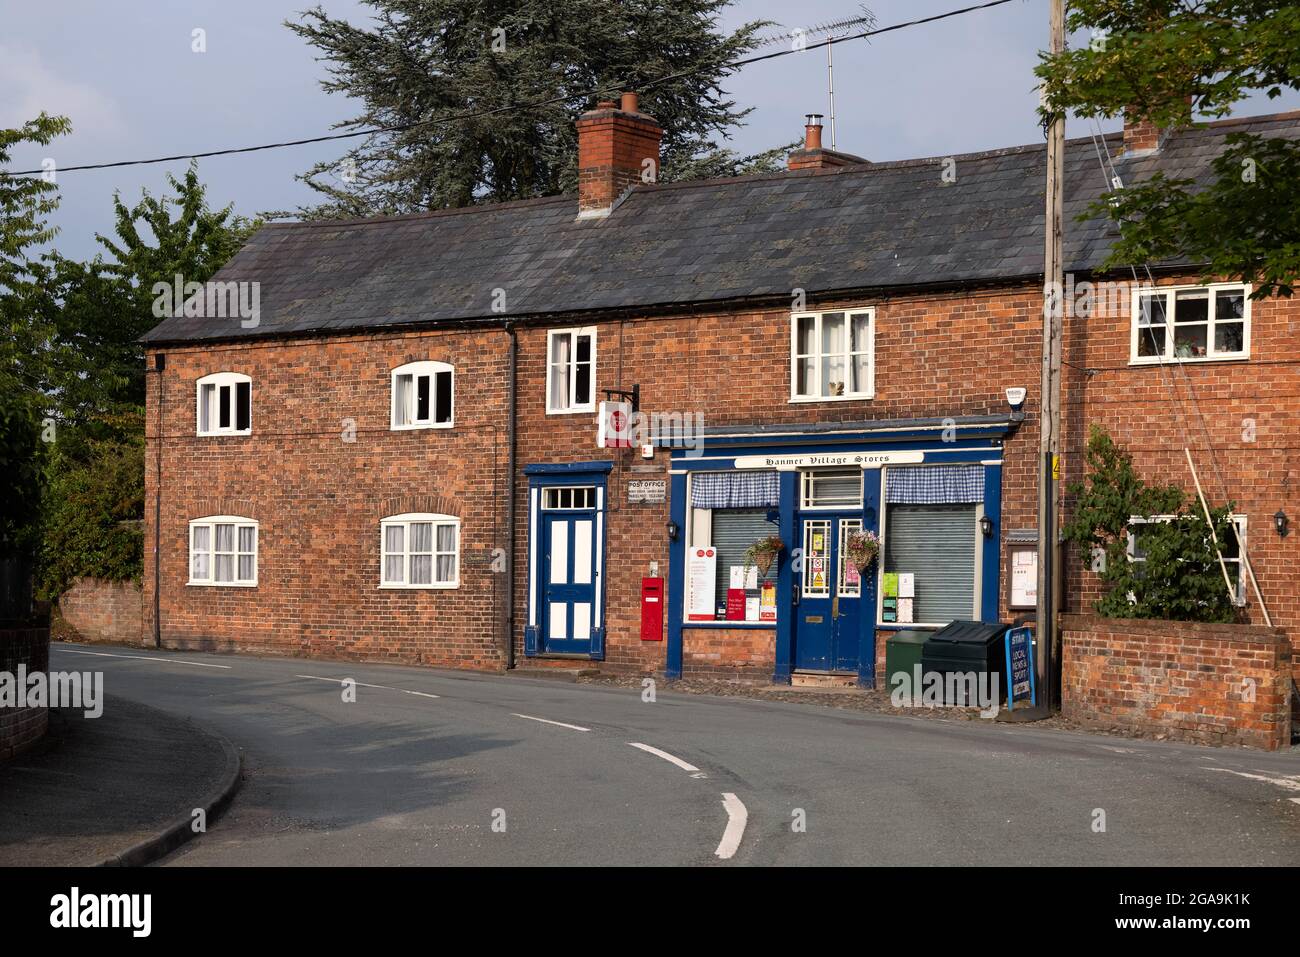 HANMER, CLWYD, WALES - JULY 10 : View of Hanmer Village Stores in Hanmer, Wales on July 10, 2021 Stock Photo